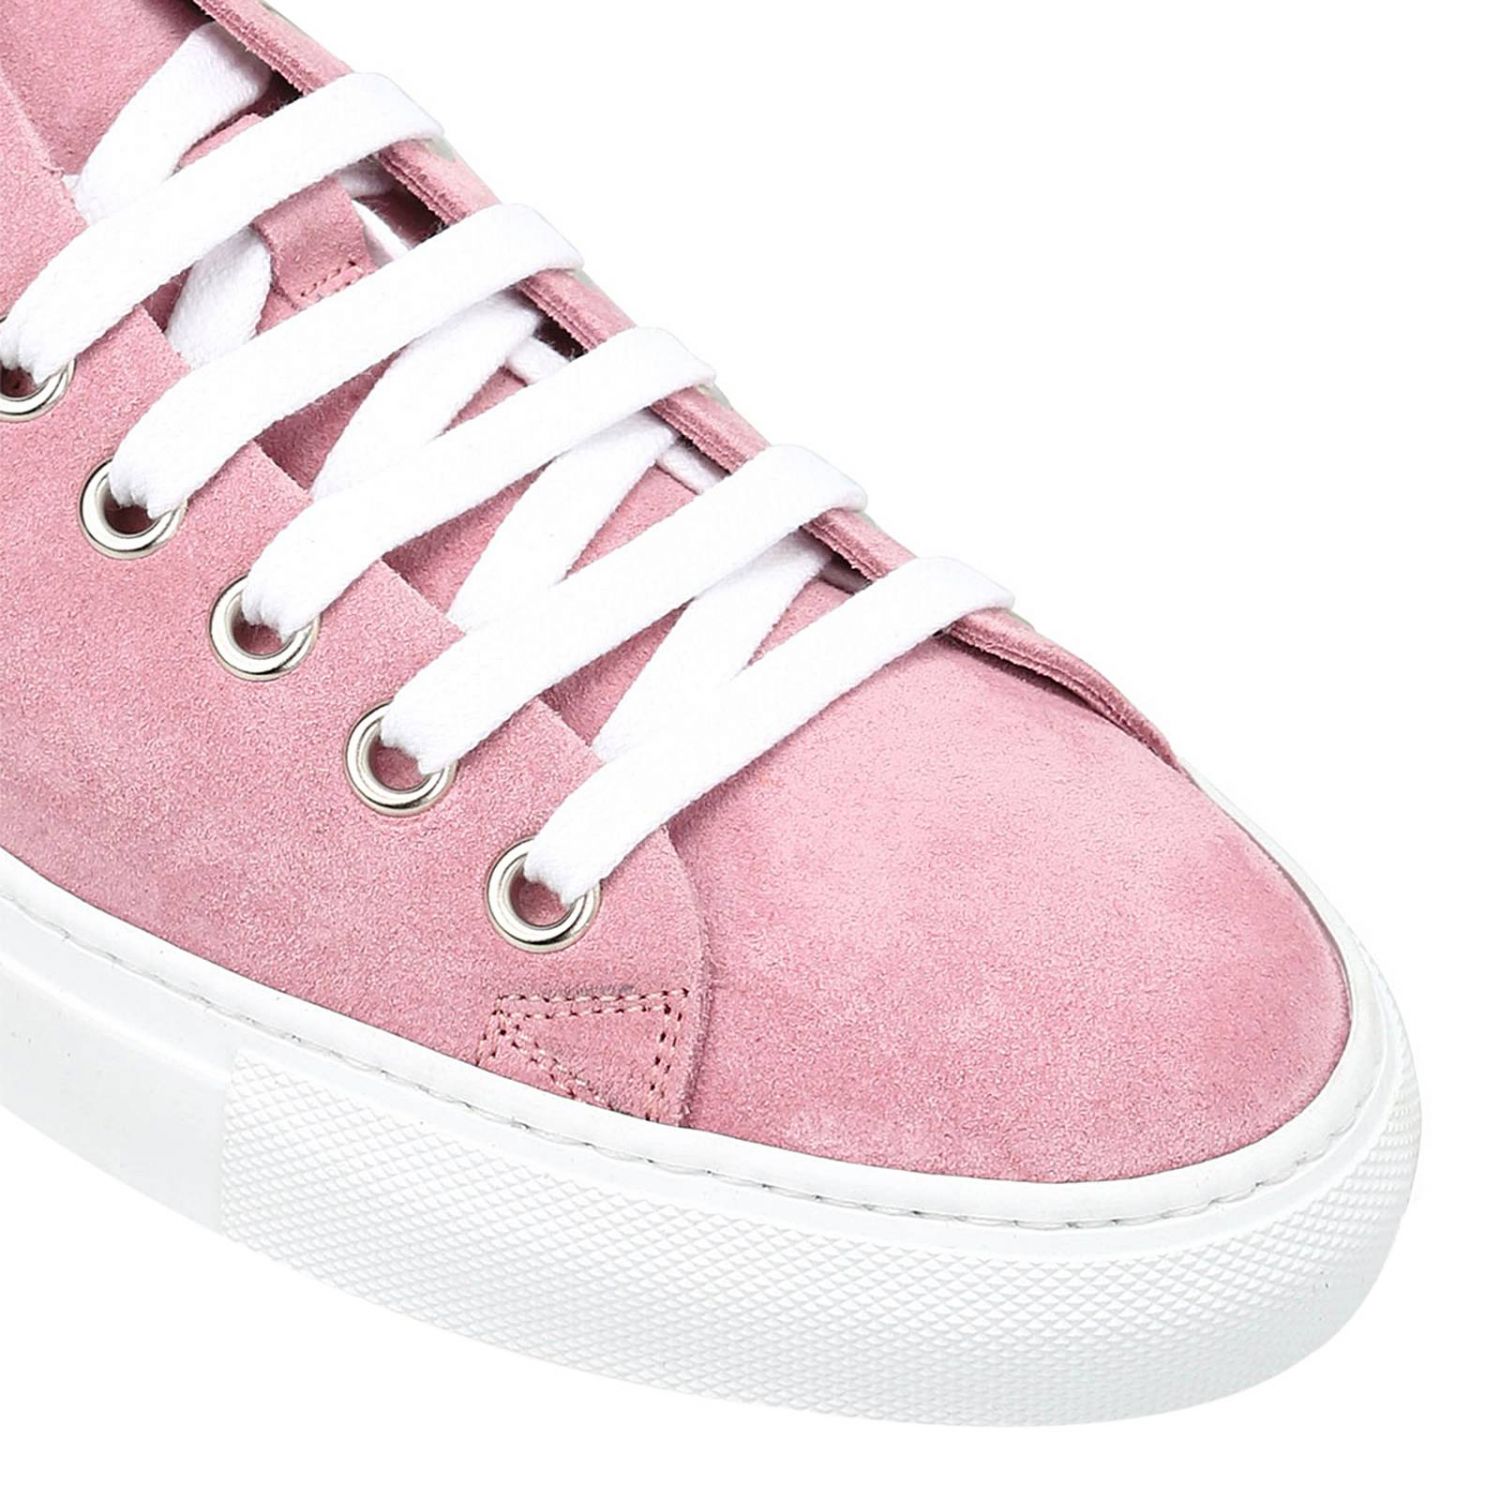 dsquared2 pink shoes